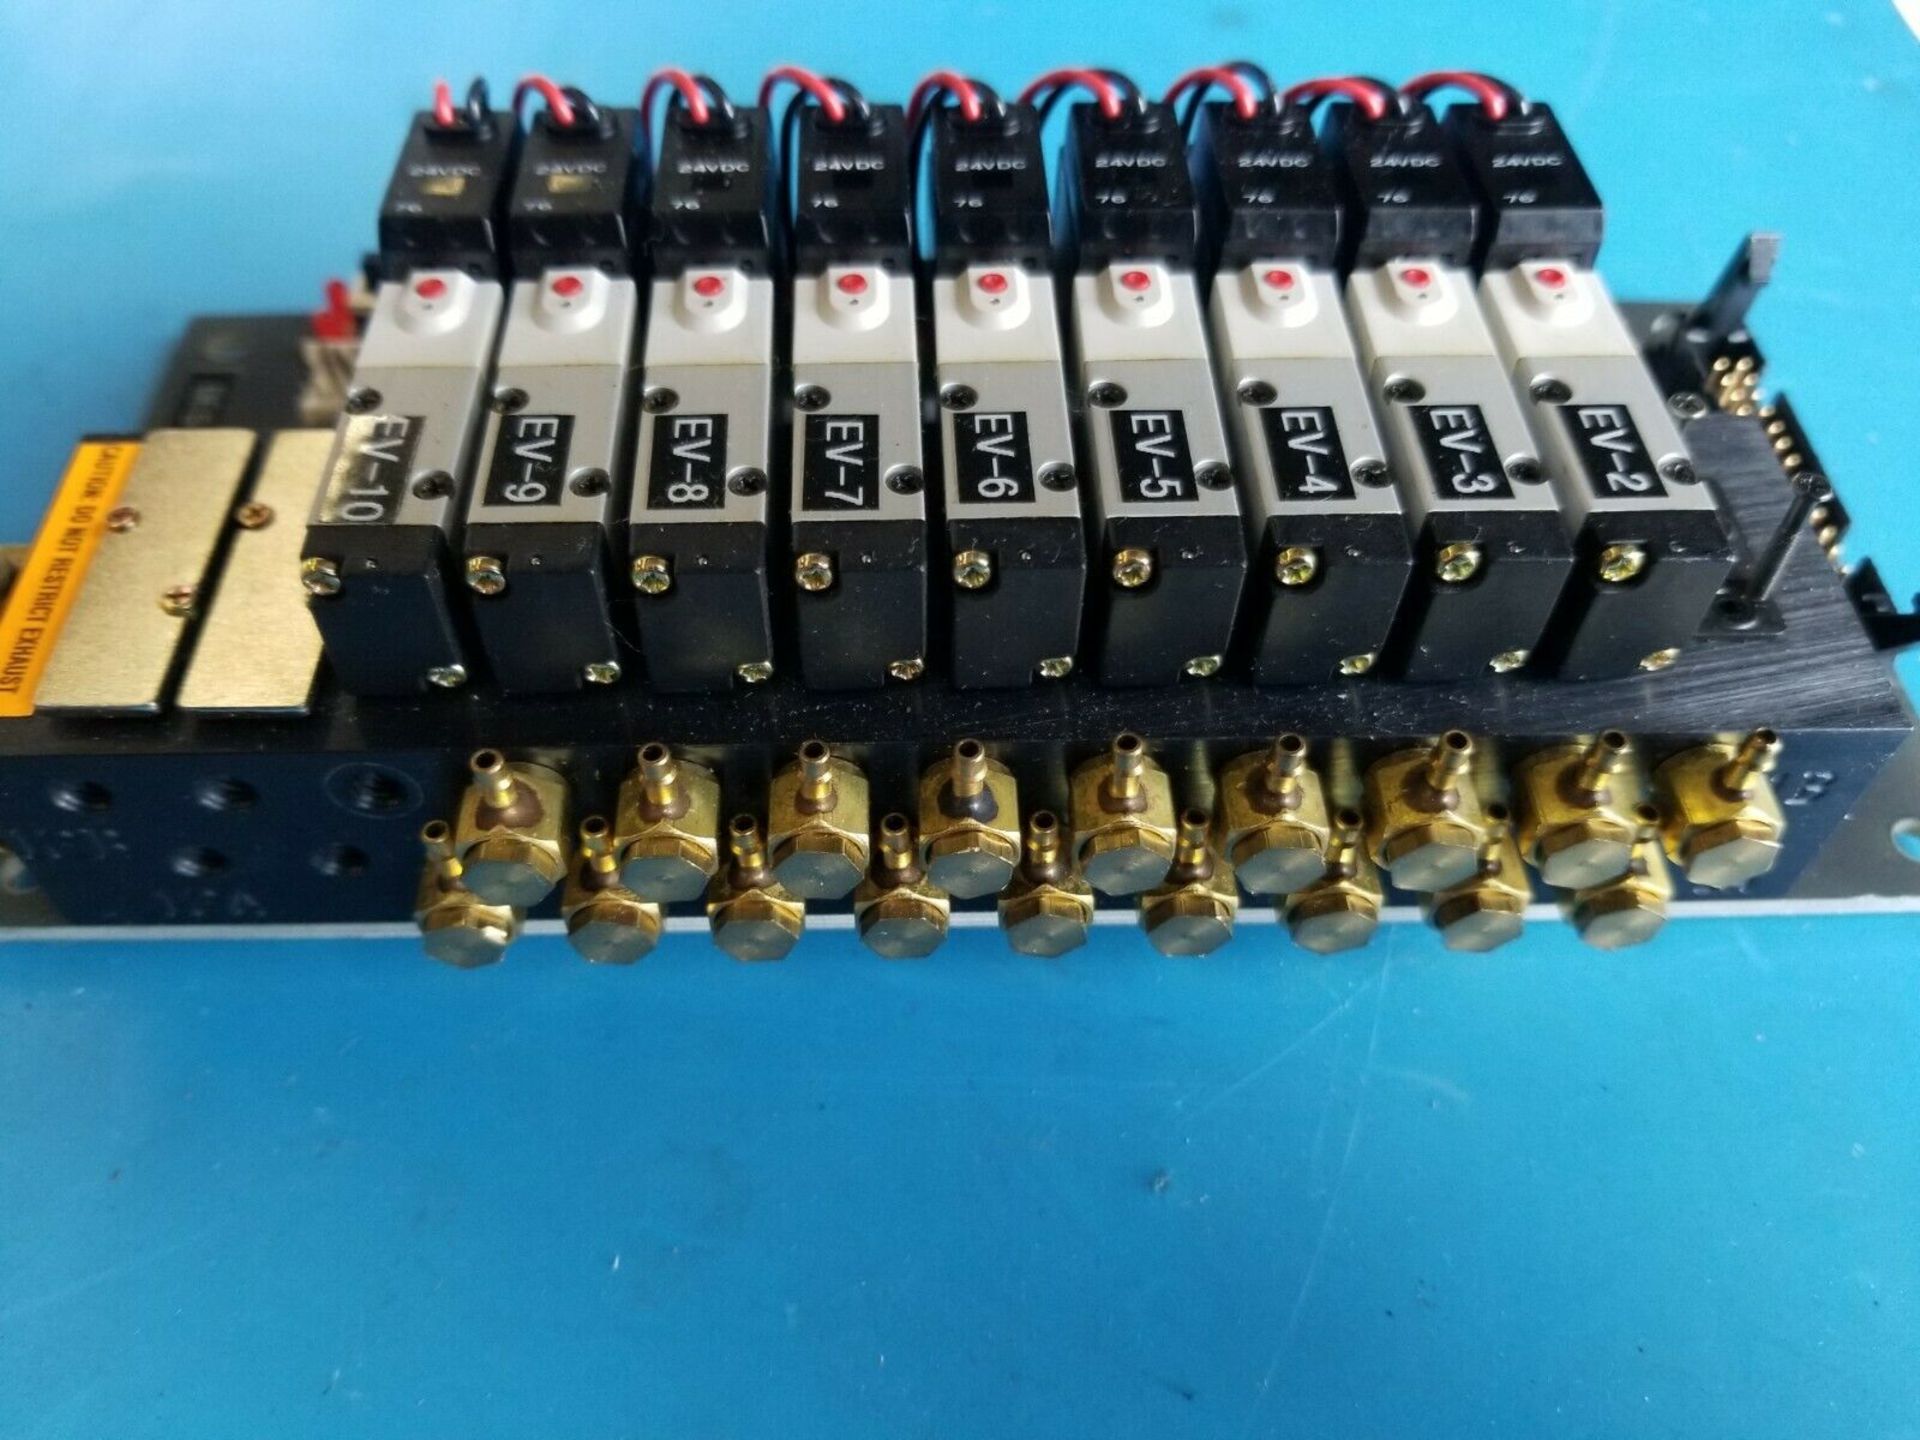 NEW BAY PNEUMATIC PCB MANIFOLD WITH 9 HUMPHREY SOLENOID VALVES - Image 4 of 4